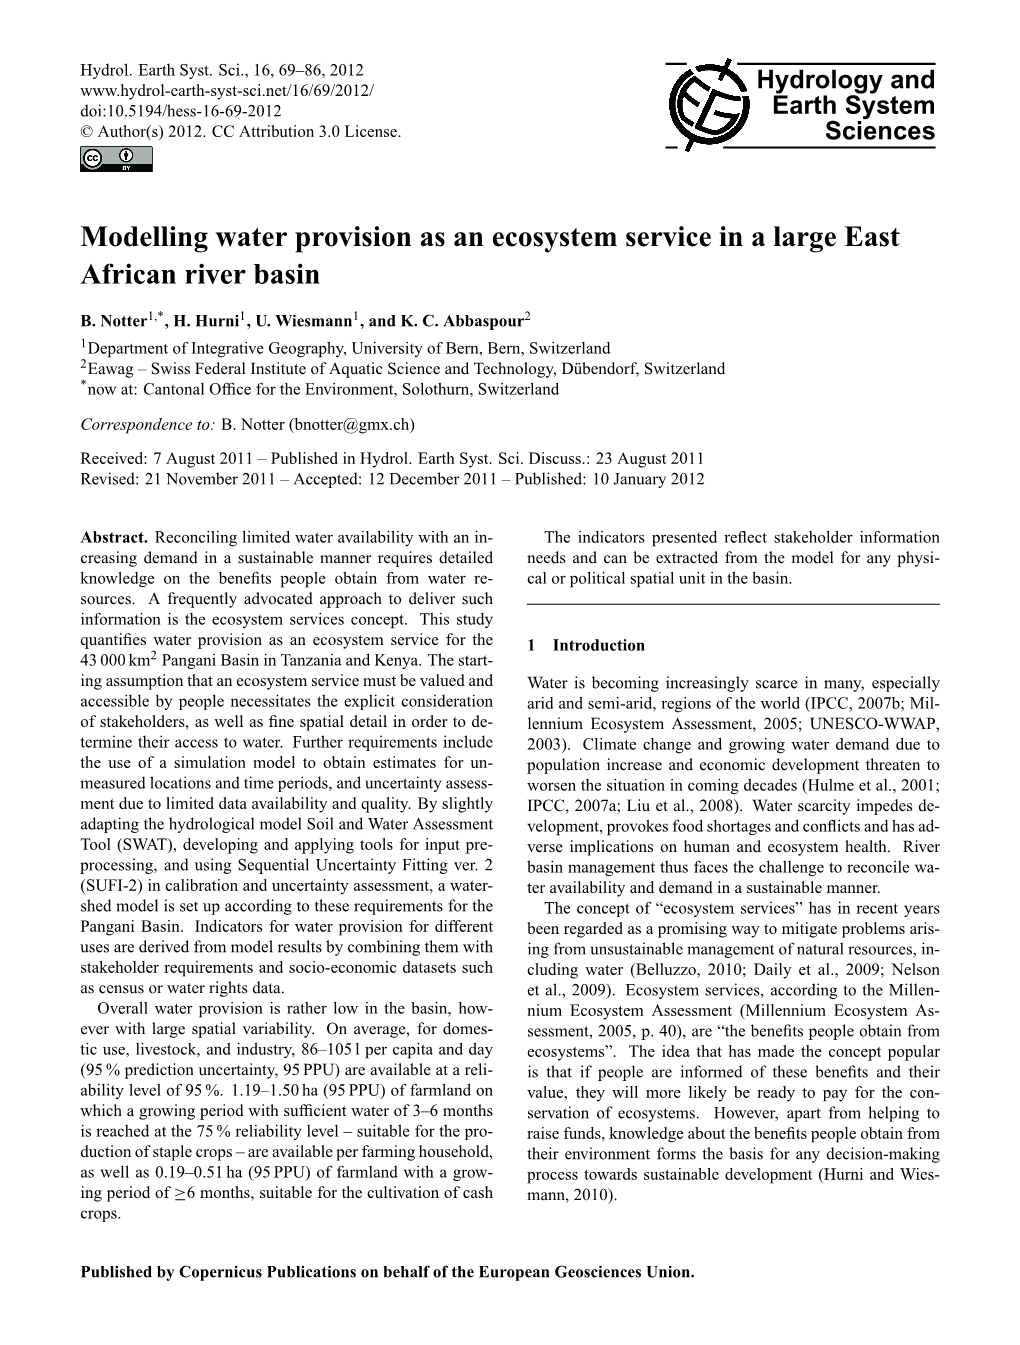 Modelling Water Provision As an Ecosystem Service in a Large East African River Basin